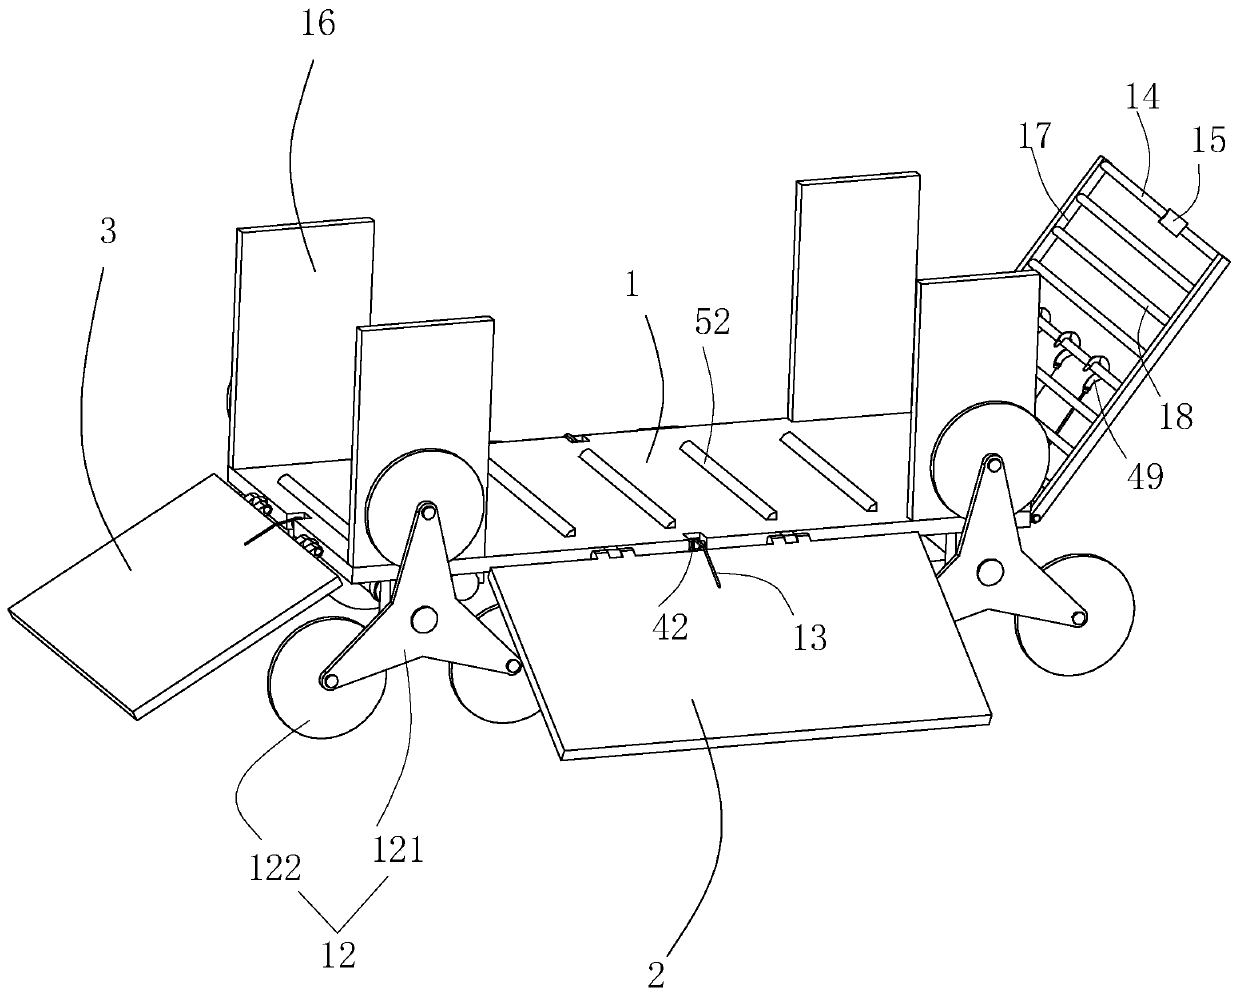 Electric power assisted carrying device for stair